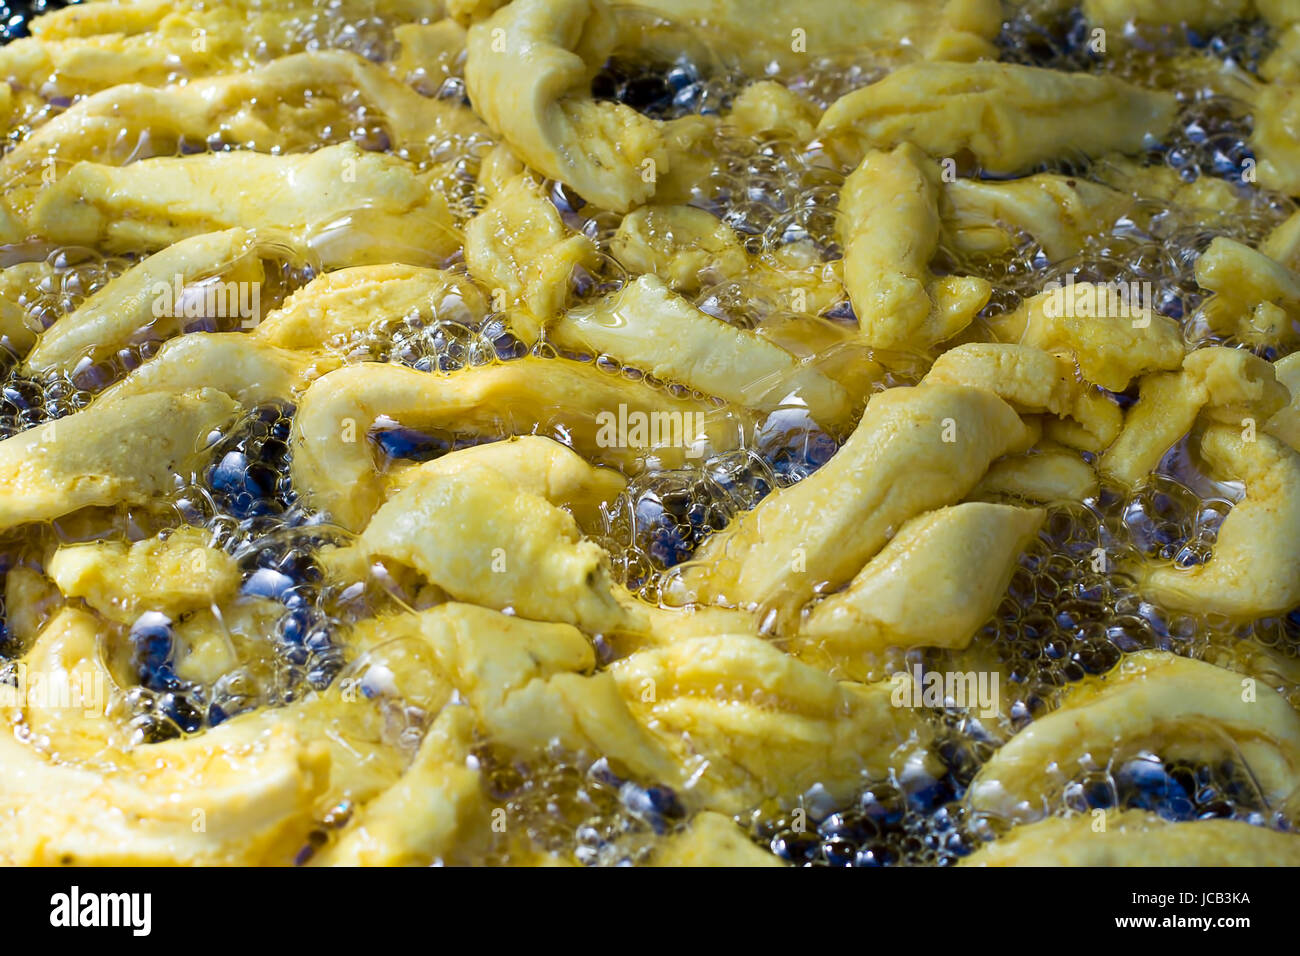 Indian snacks in the hot oil in the pan. Stock Photo